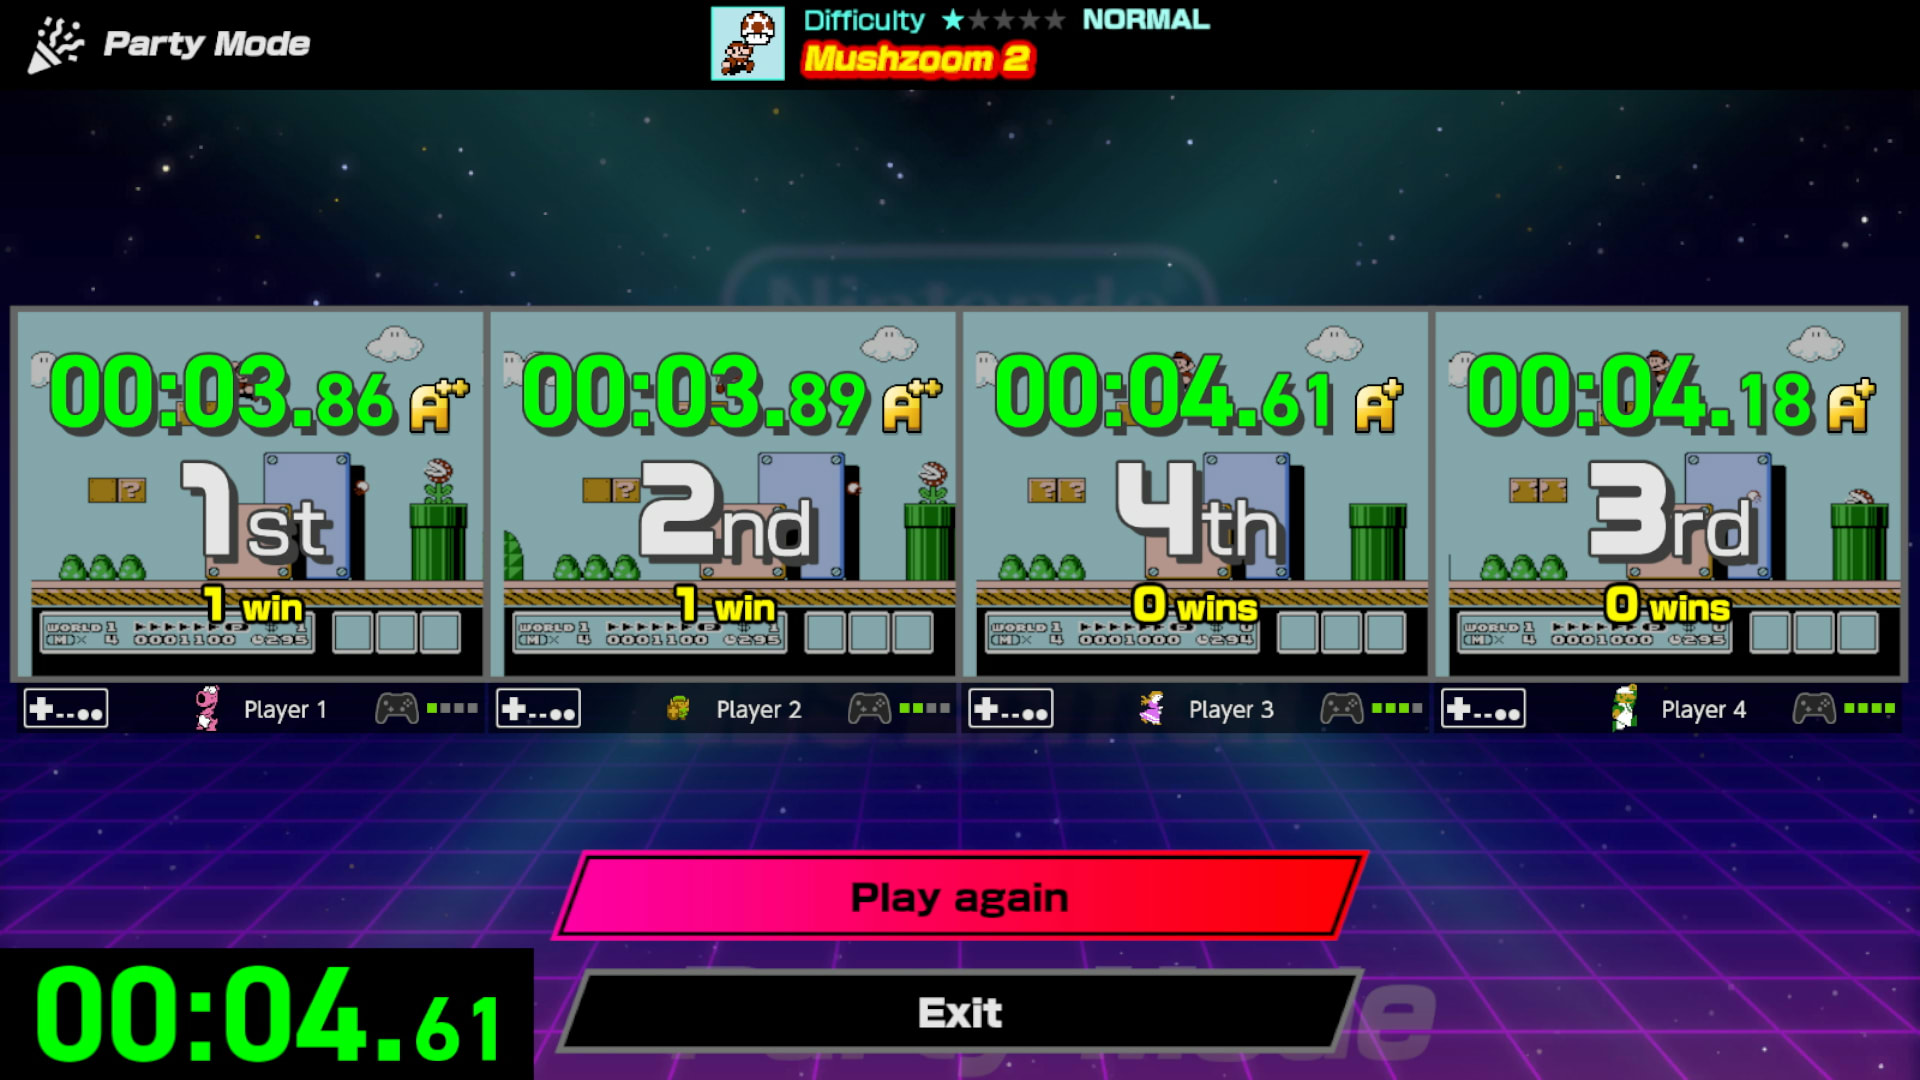 Four players compete at the same time. Each player has their own portion of the screen. At the end of the challenge, the player’s ranking, time, and letter rating are shown for each player.